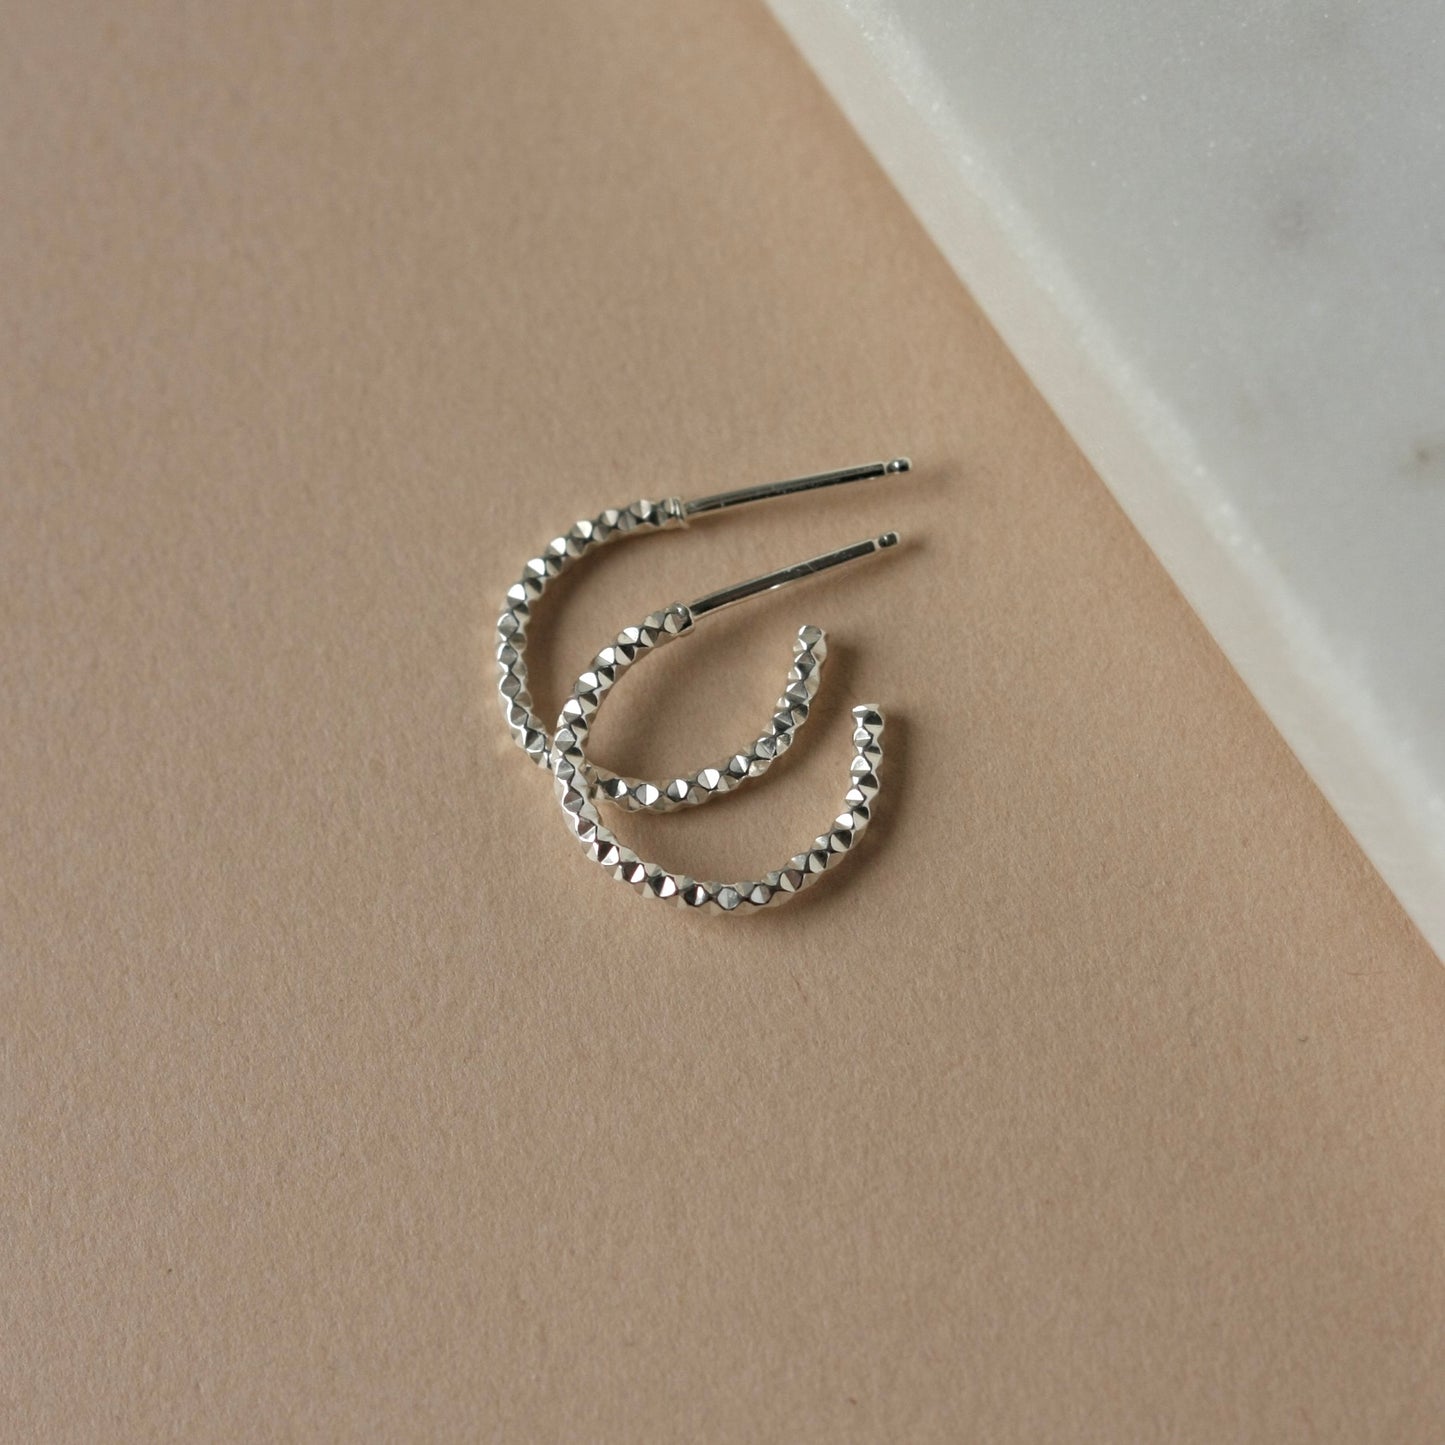 Small Sparkly 3/4 Silver Hoop Earrings